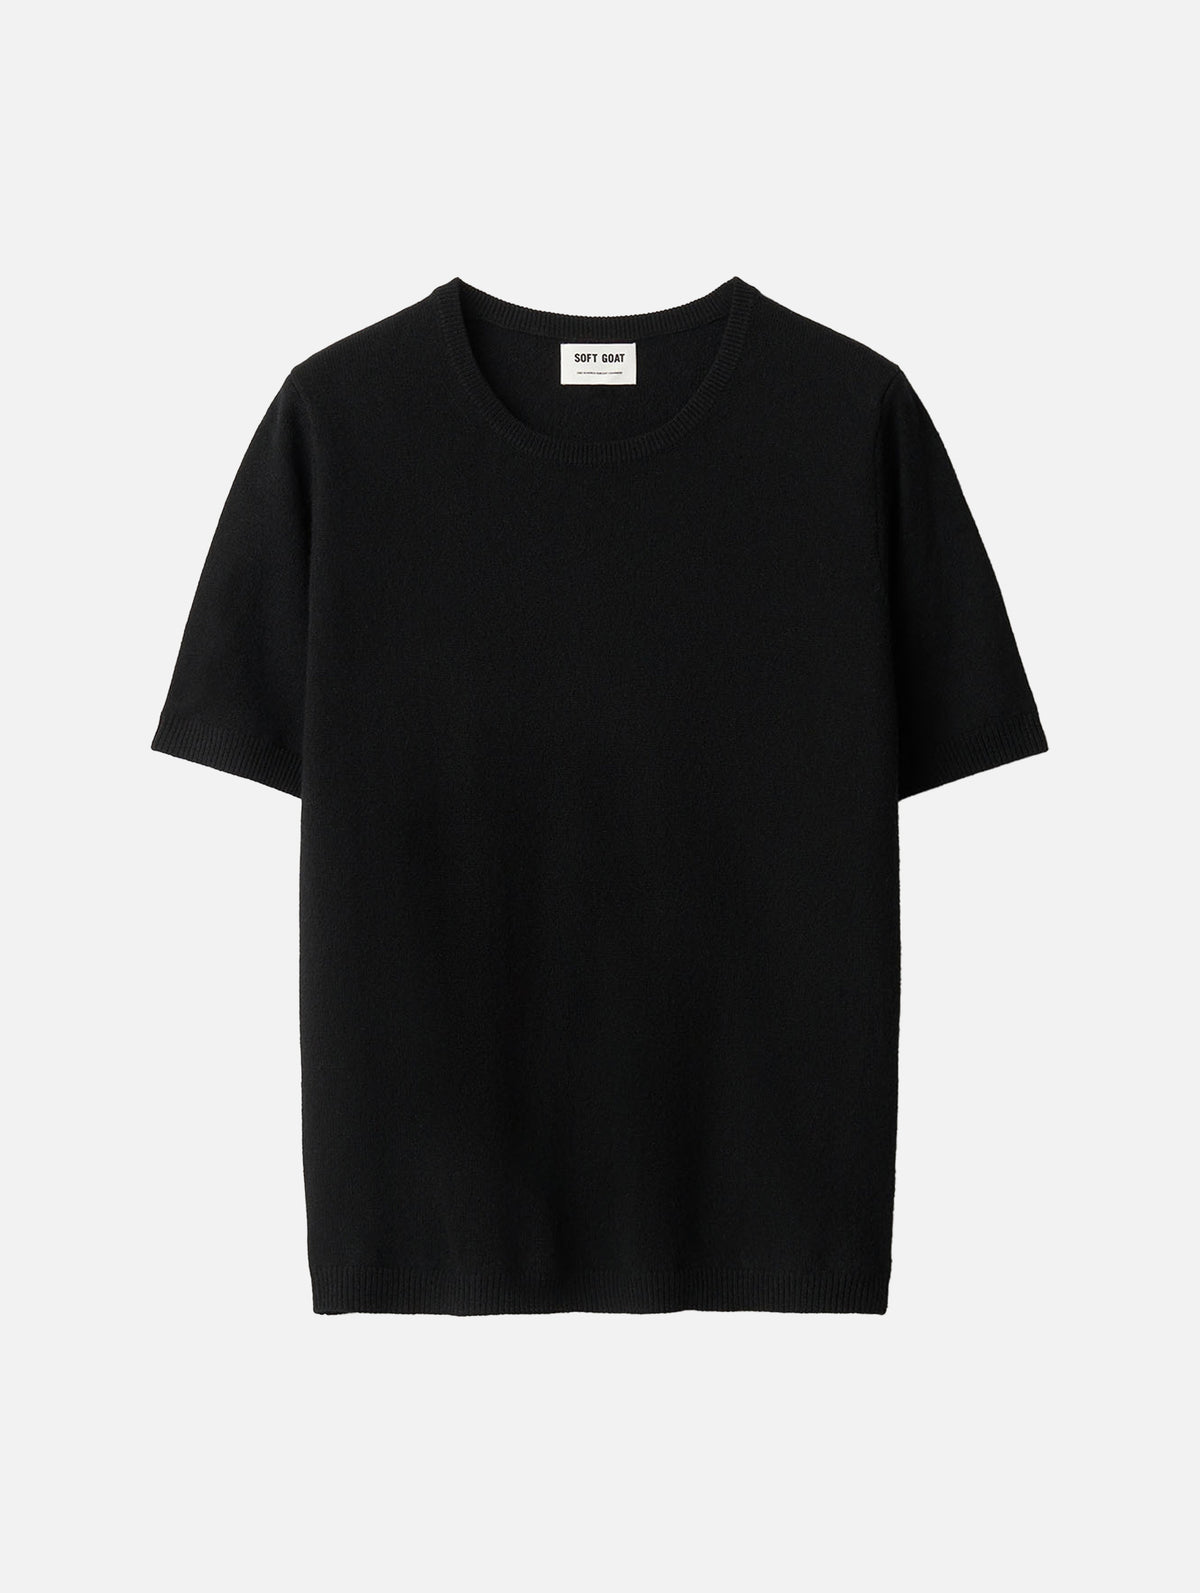 Short Sleeve O-Neck Cashmere Tee in Black